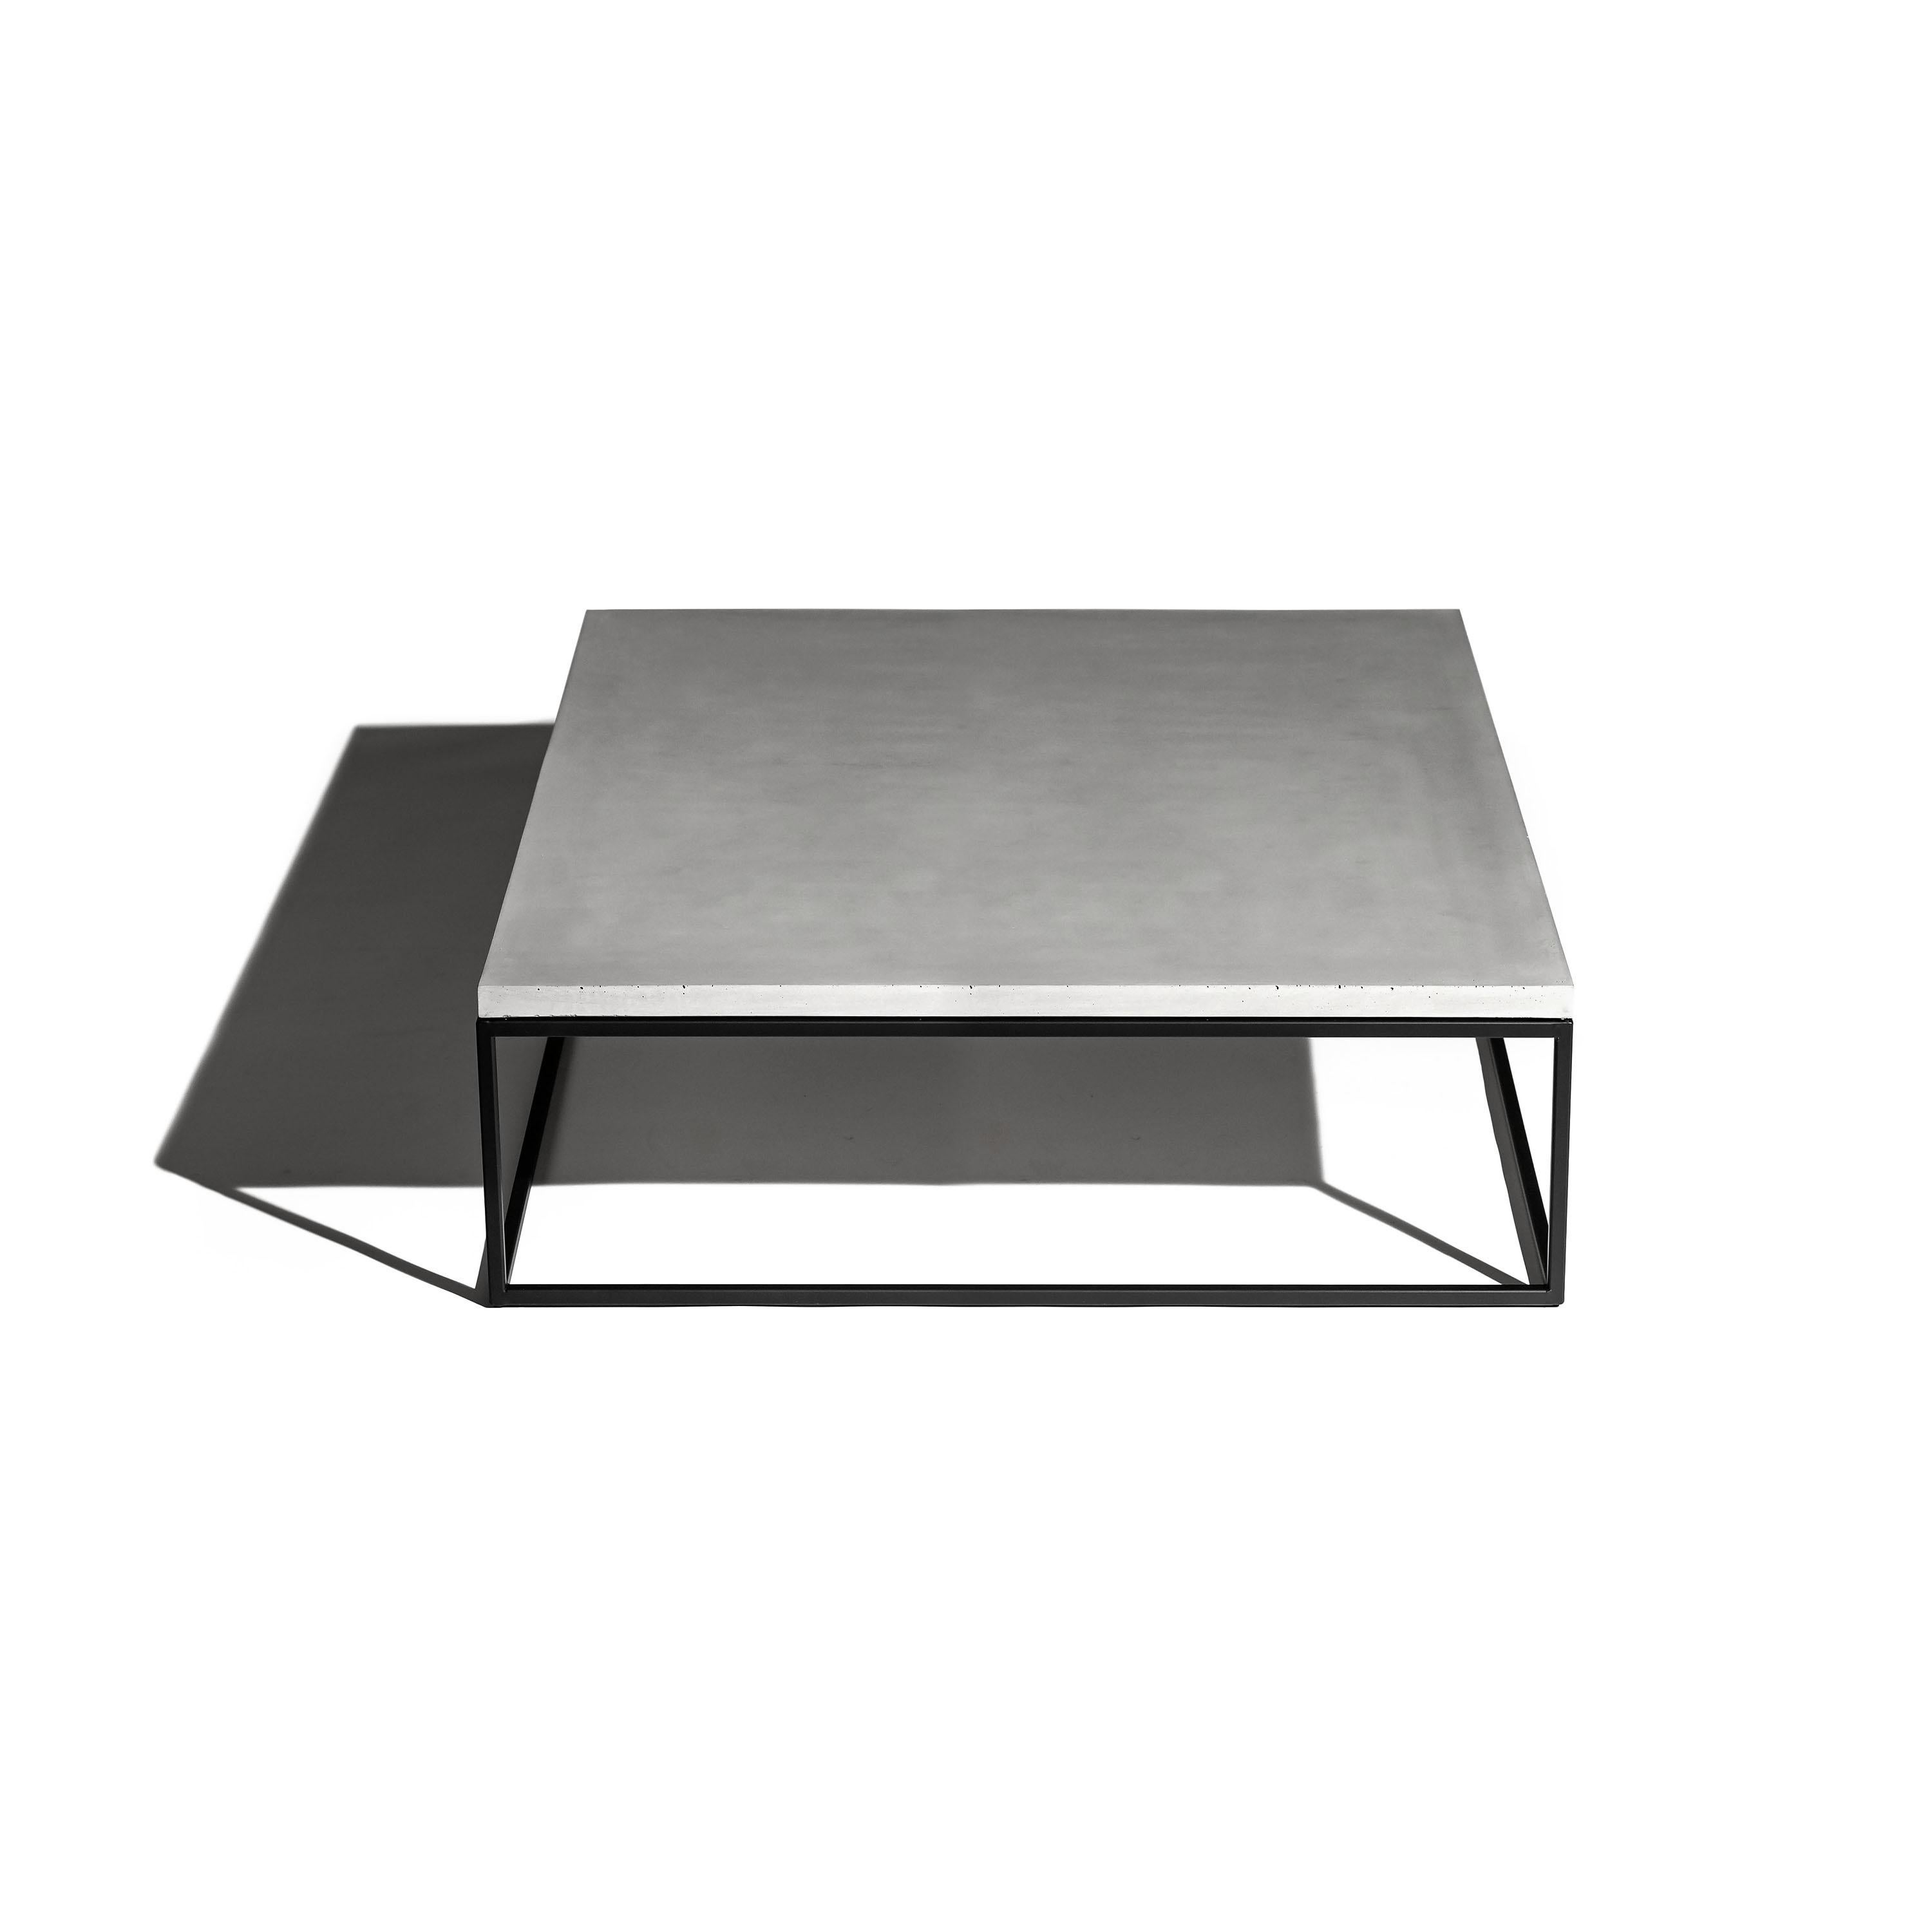 Scandinavian Modern Perspective 1000x1000 Coffee Table Black For Sale